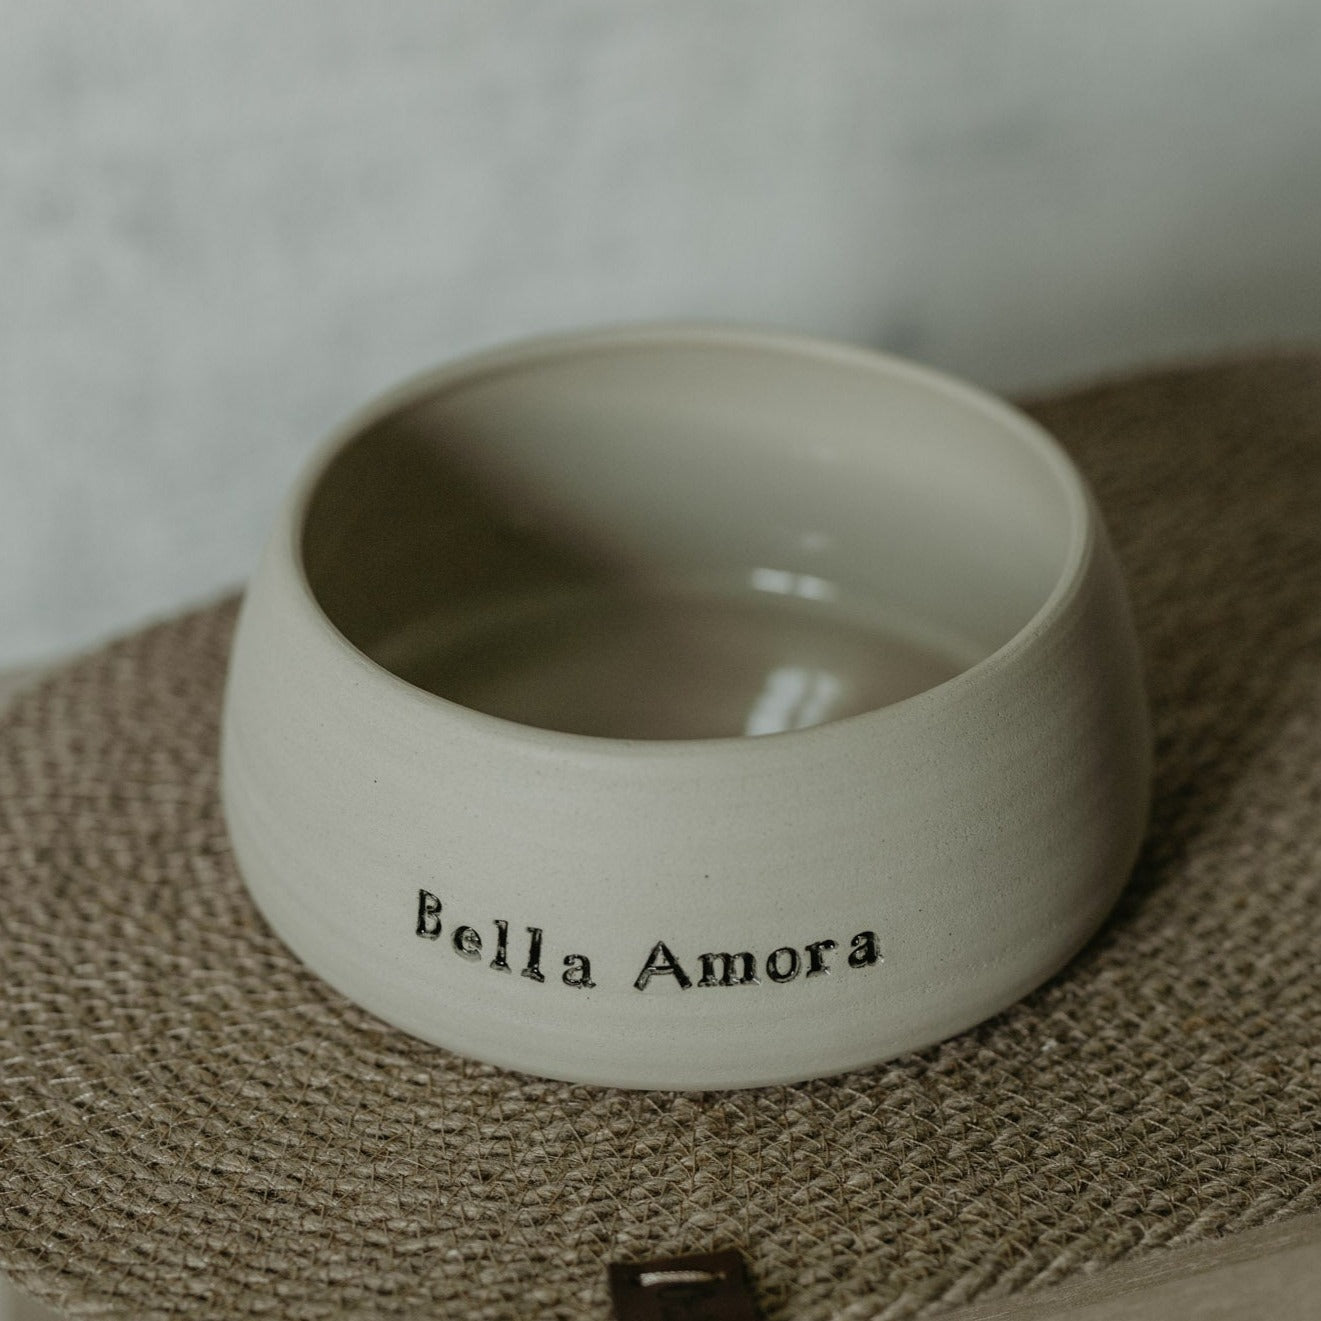 Modern ceramic dog bowl - ideal for food or water - crafted with care and attention to detail.